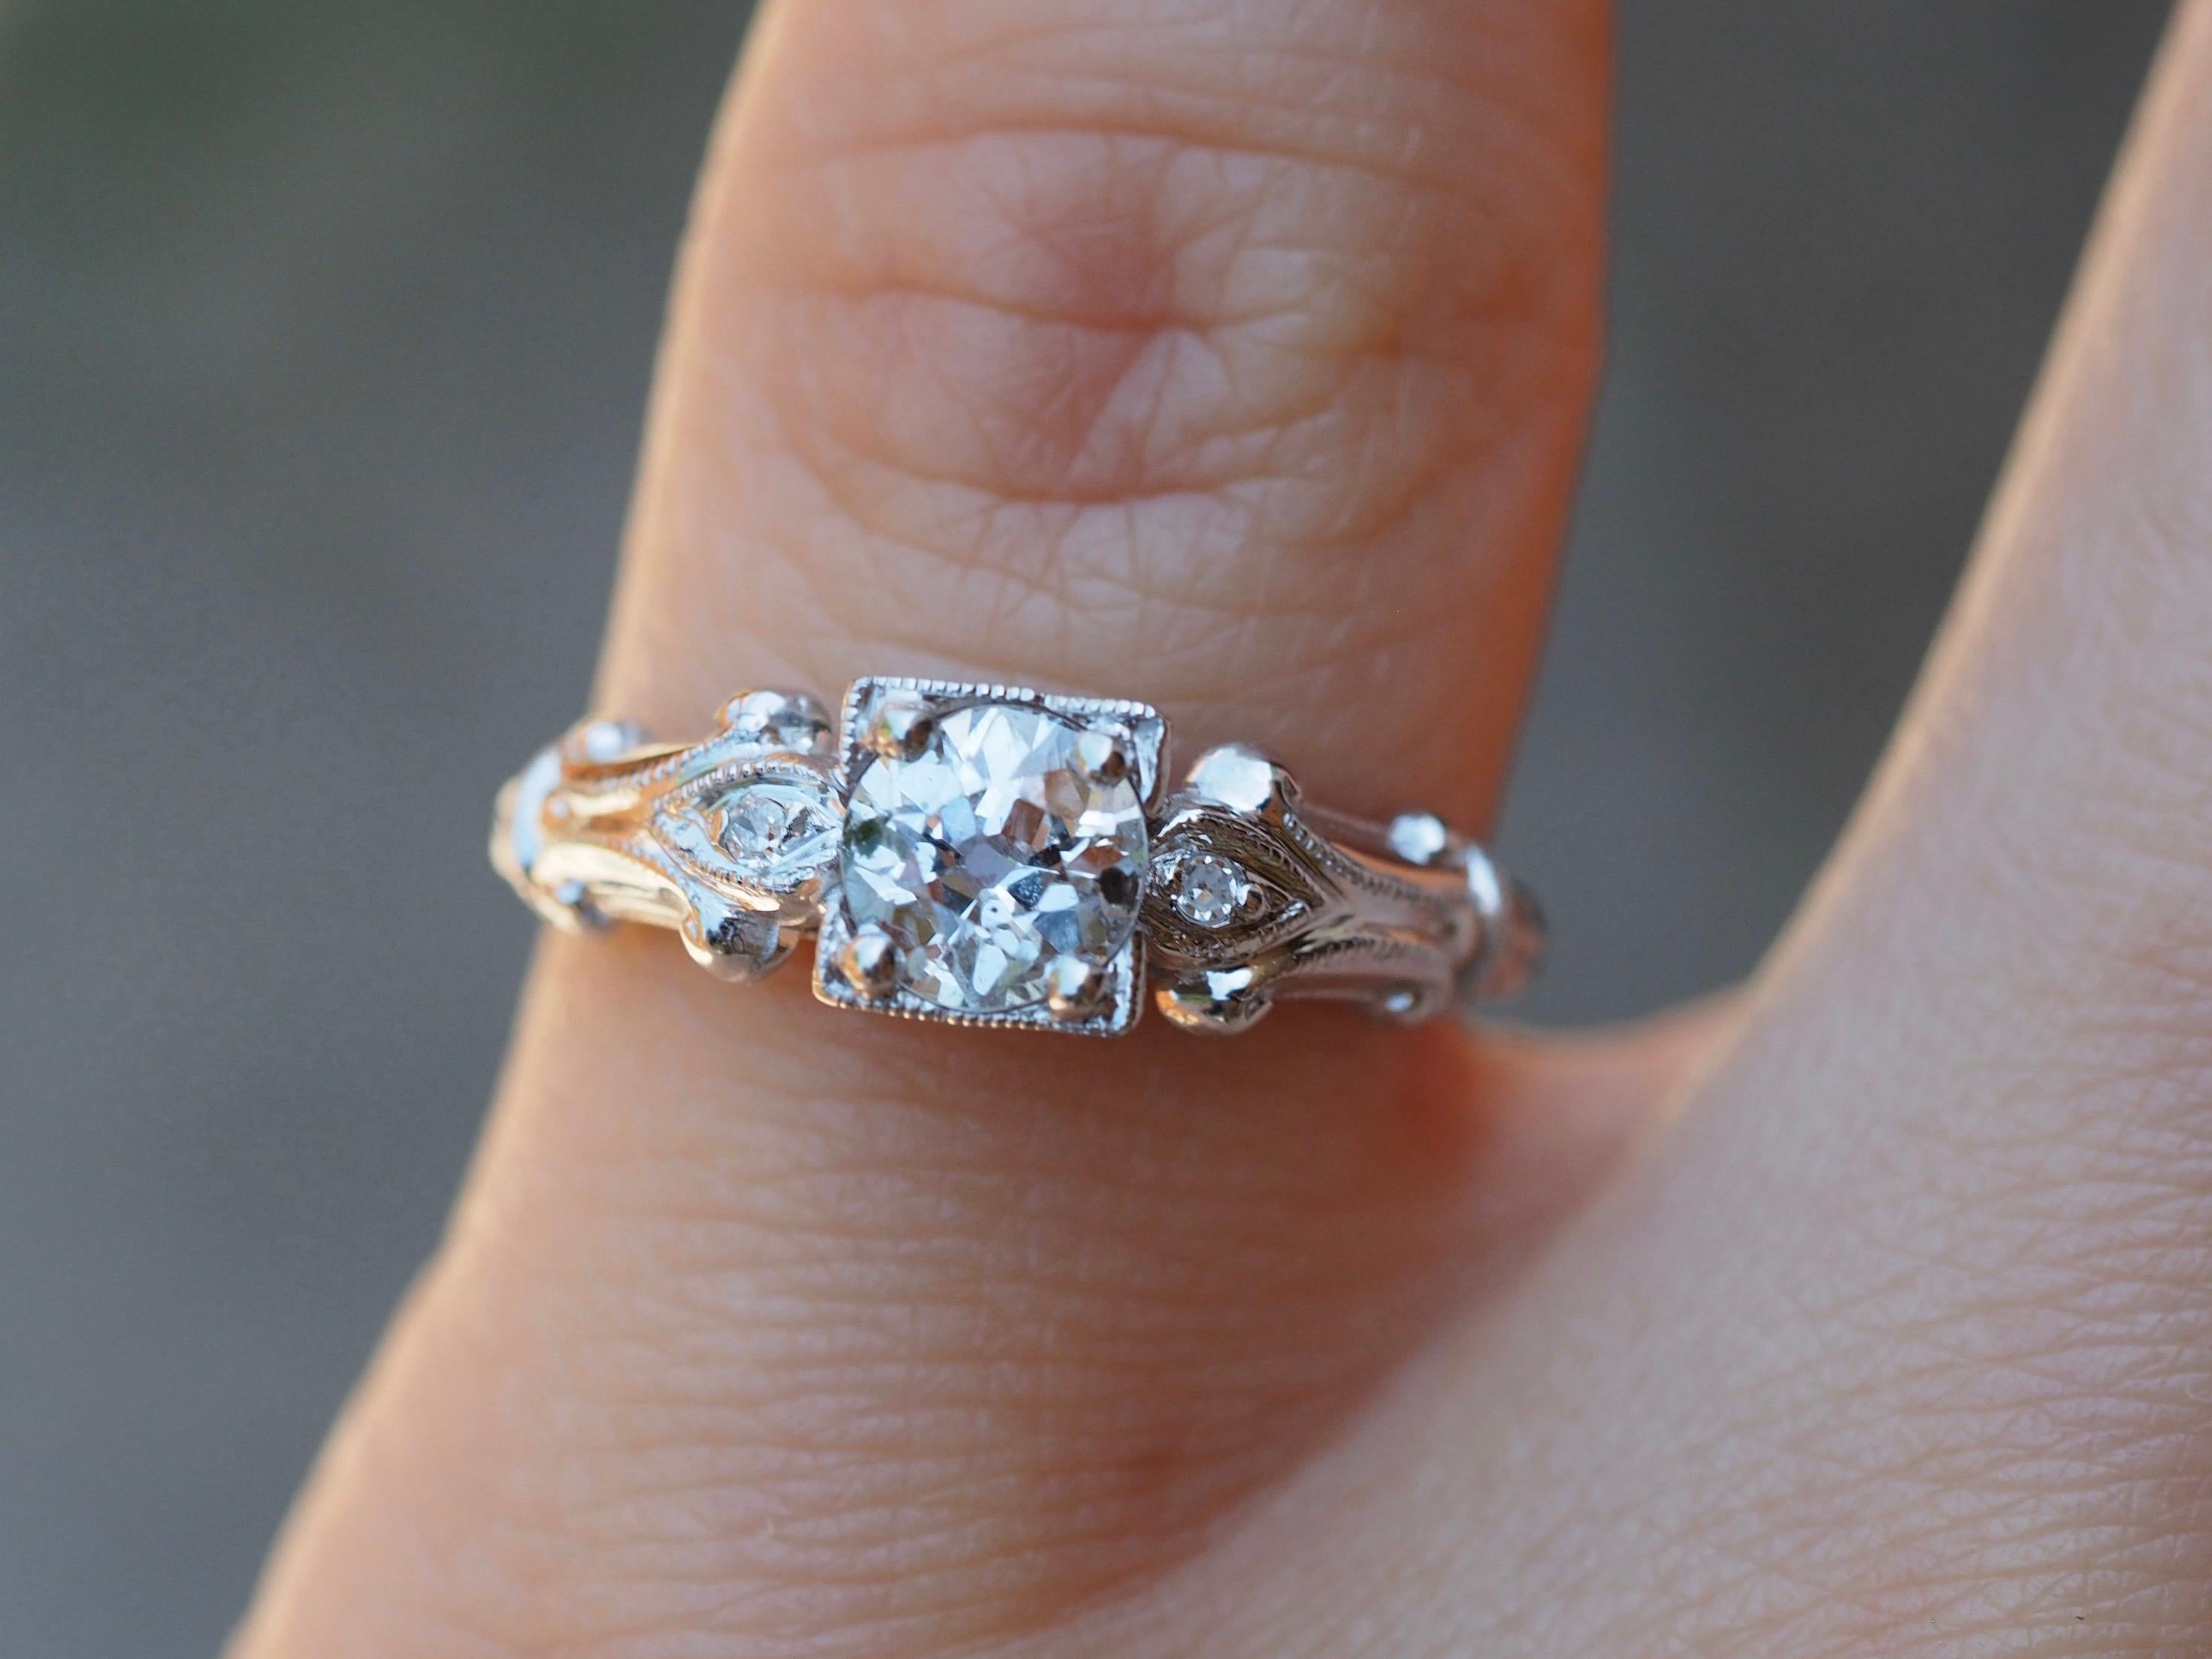 Vintage Art Deco 14 Karat White Gold Old European Cut Diamond Engagement Ring In Good Condition For Sale In Addison, TX